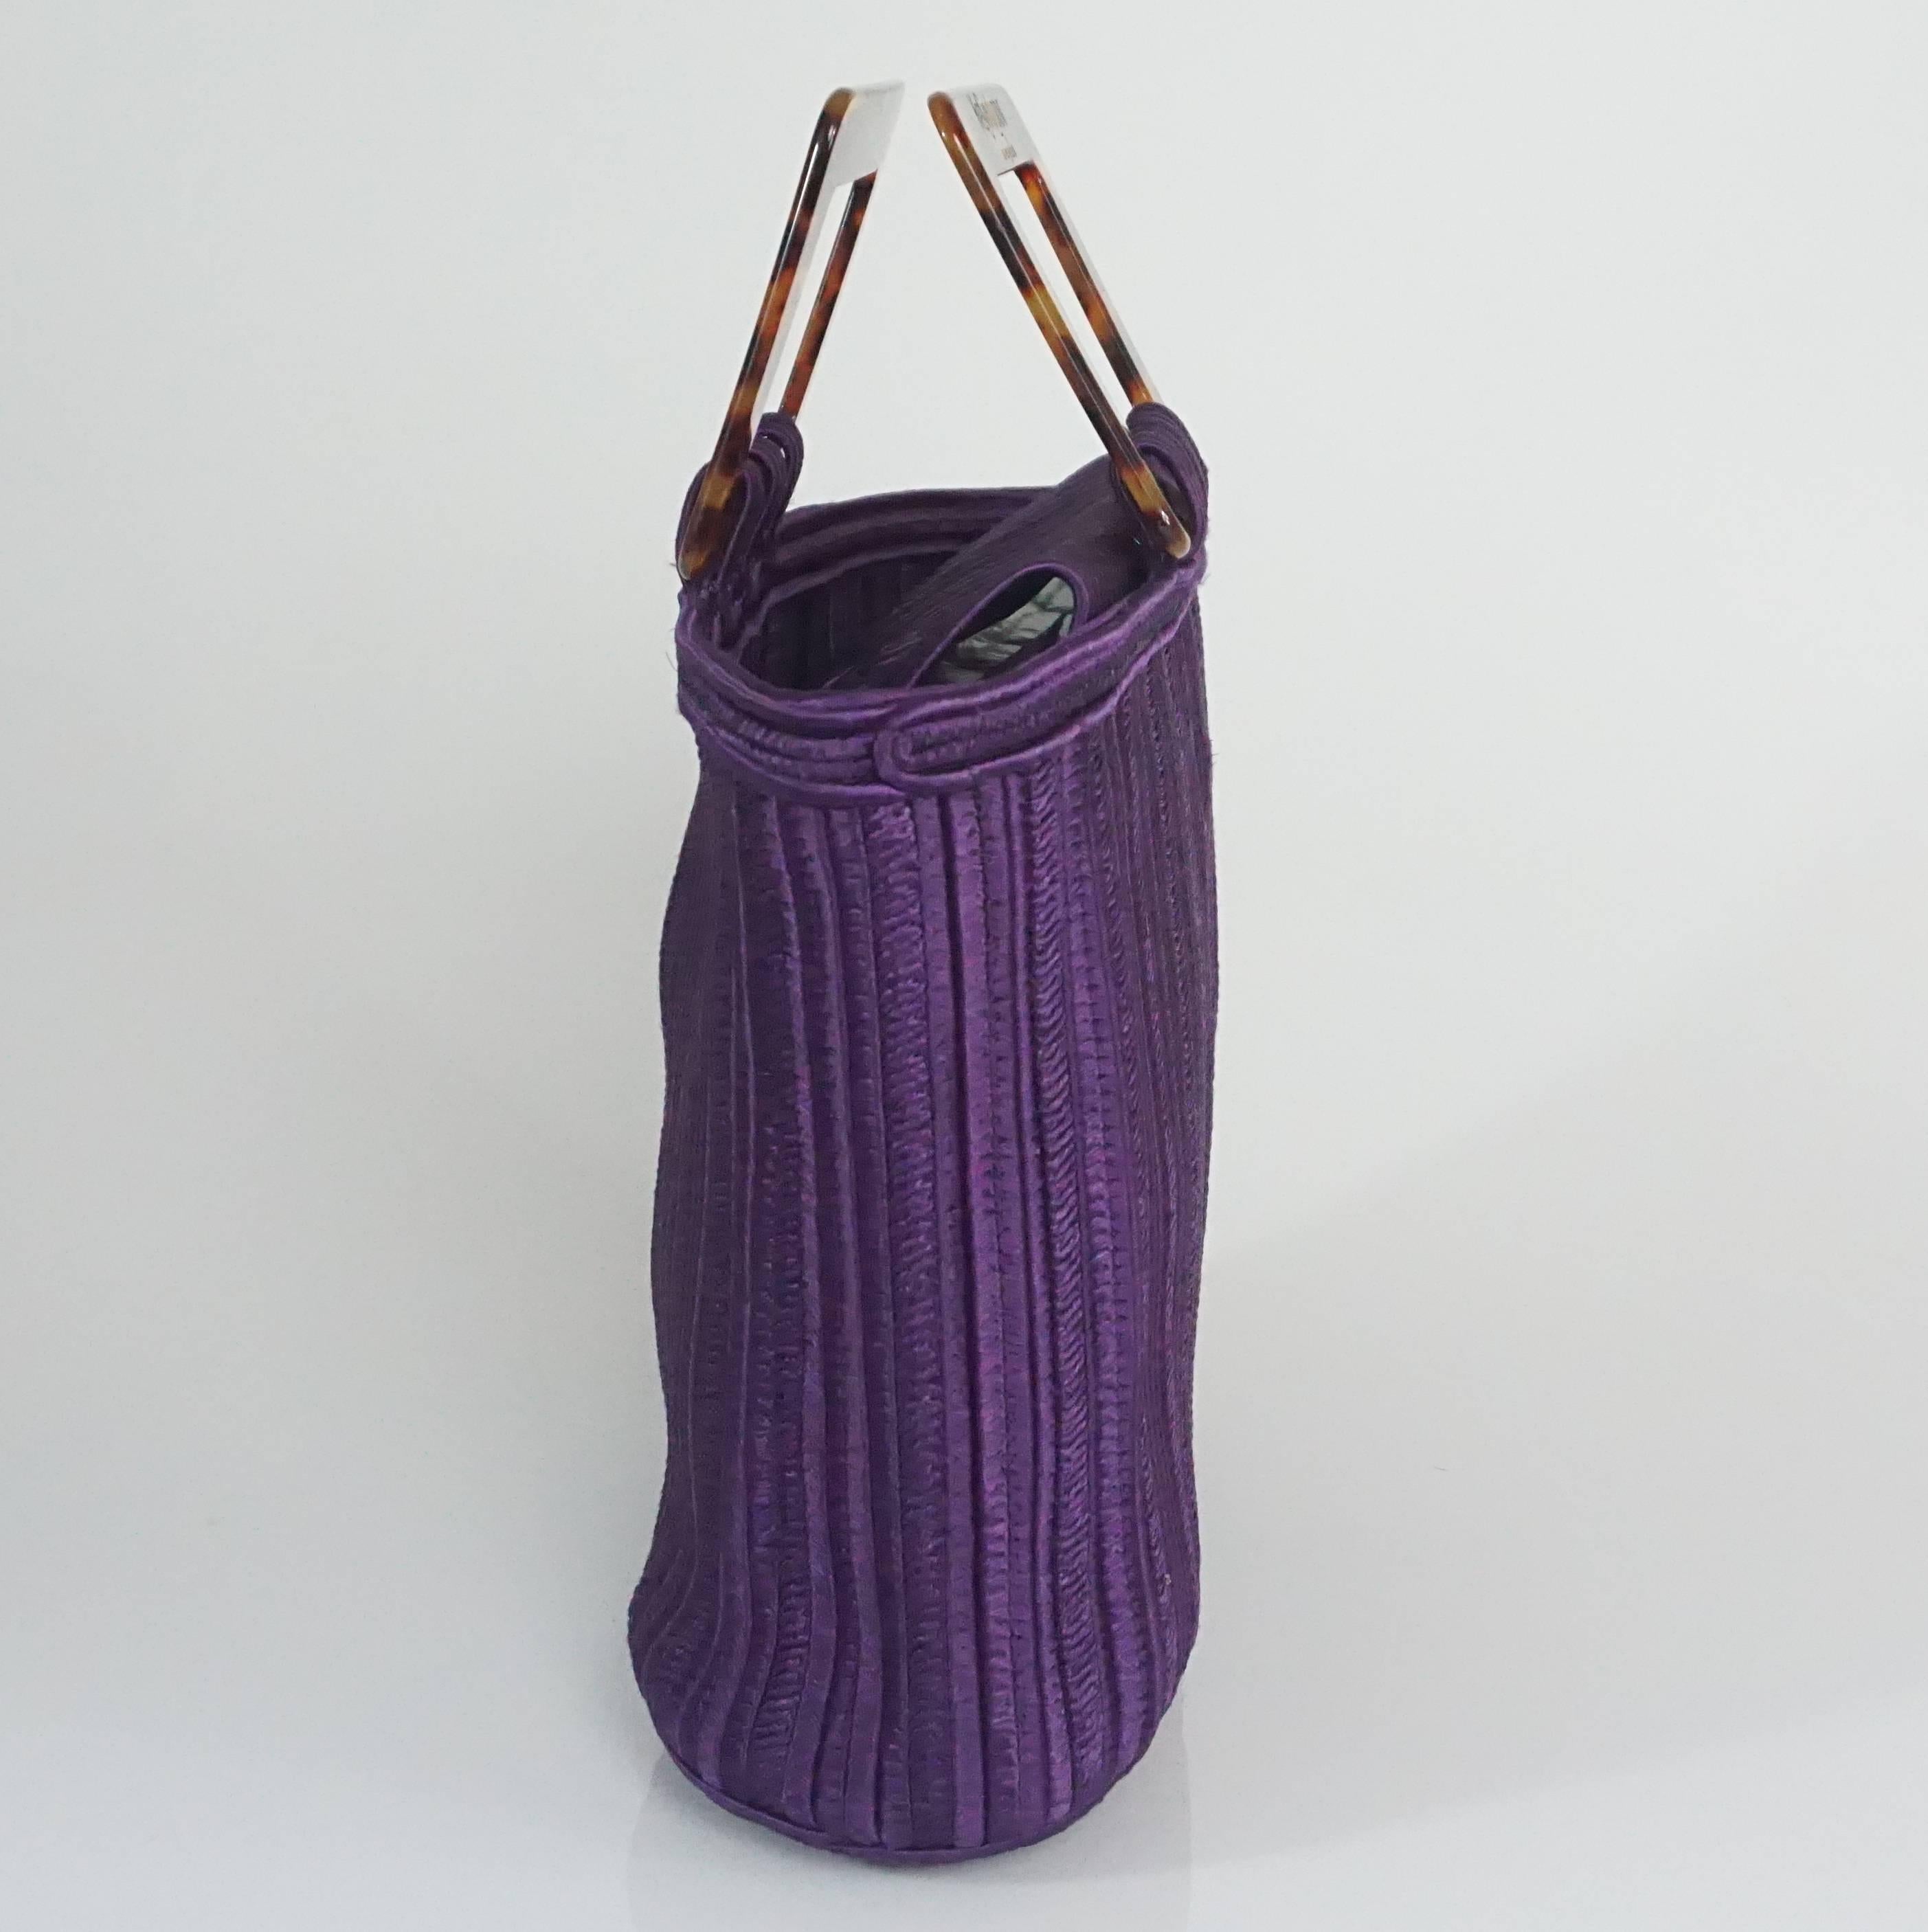 Yves Saint Laurent Rive Gauche Purple Passementerie Woven Bag - Circa 90's.This structured, thick, woven bag is purple with a tortoise square handle. The handle  has 